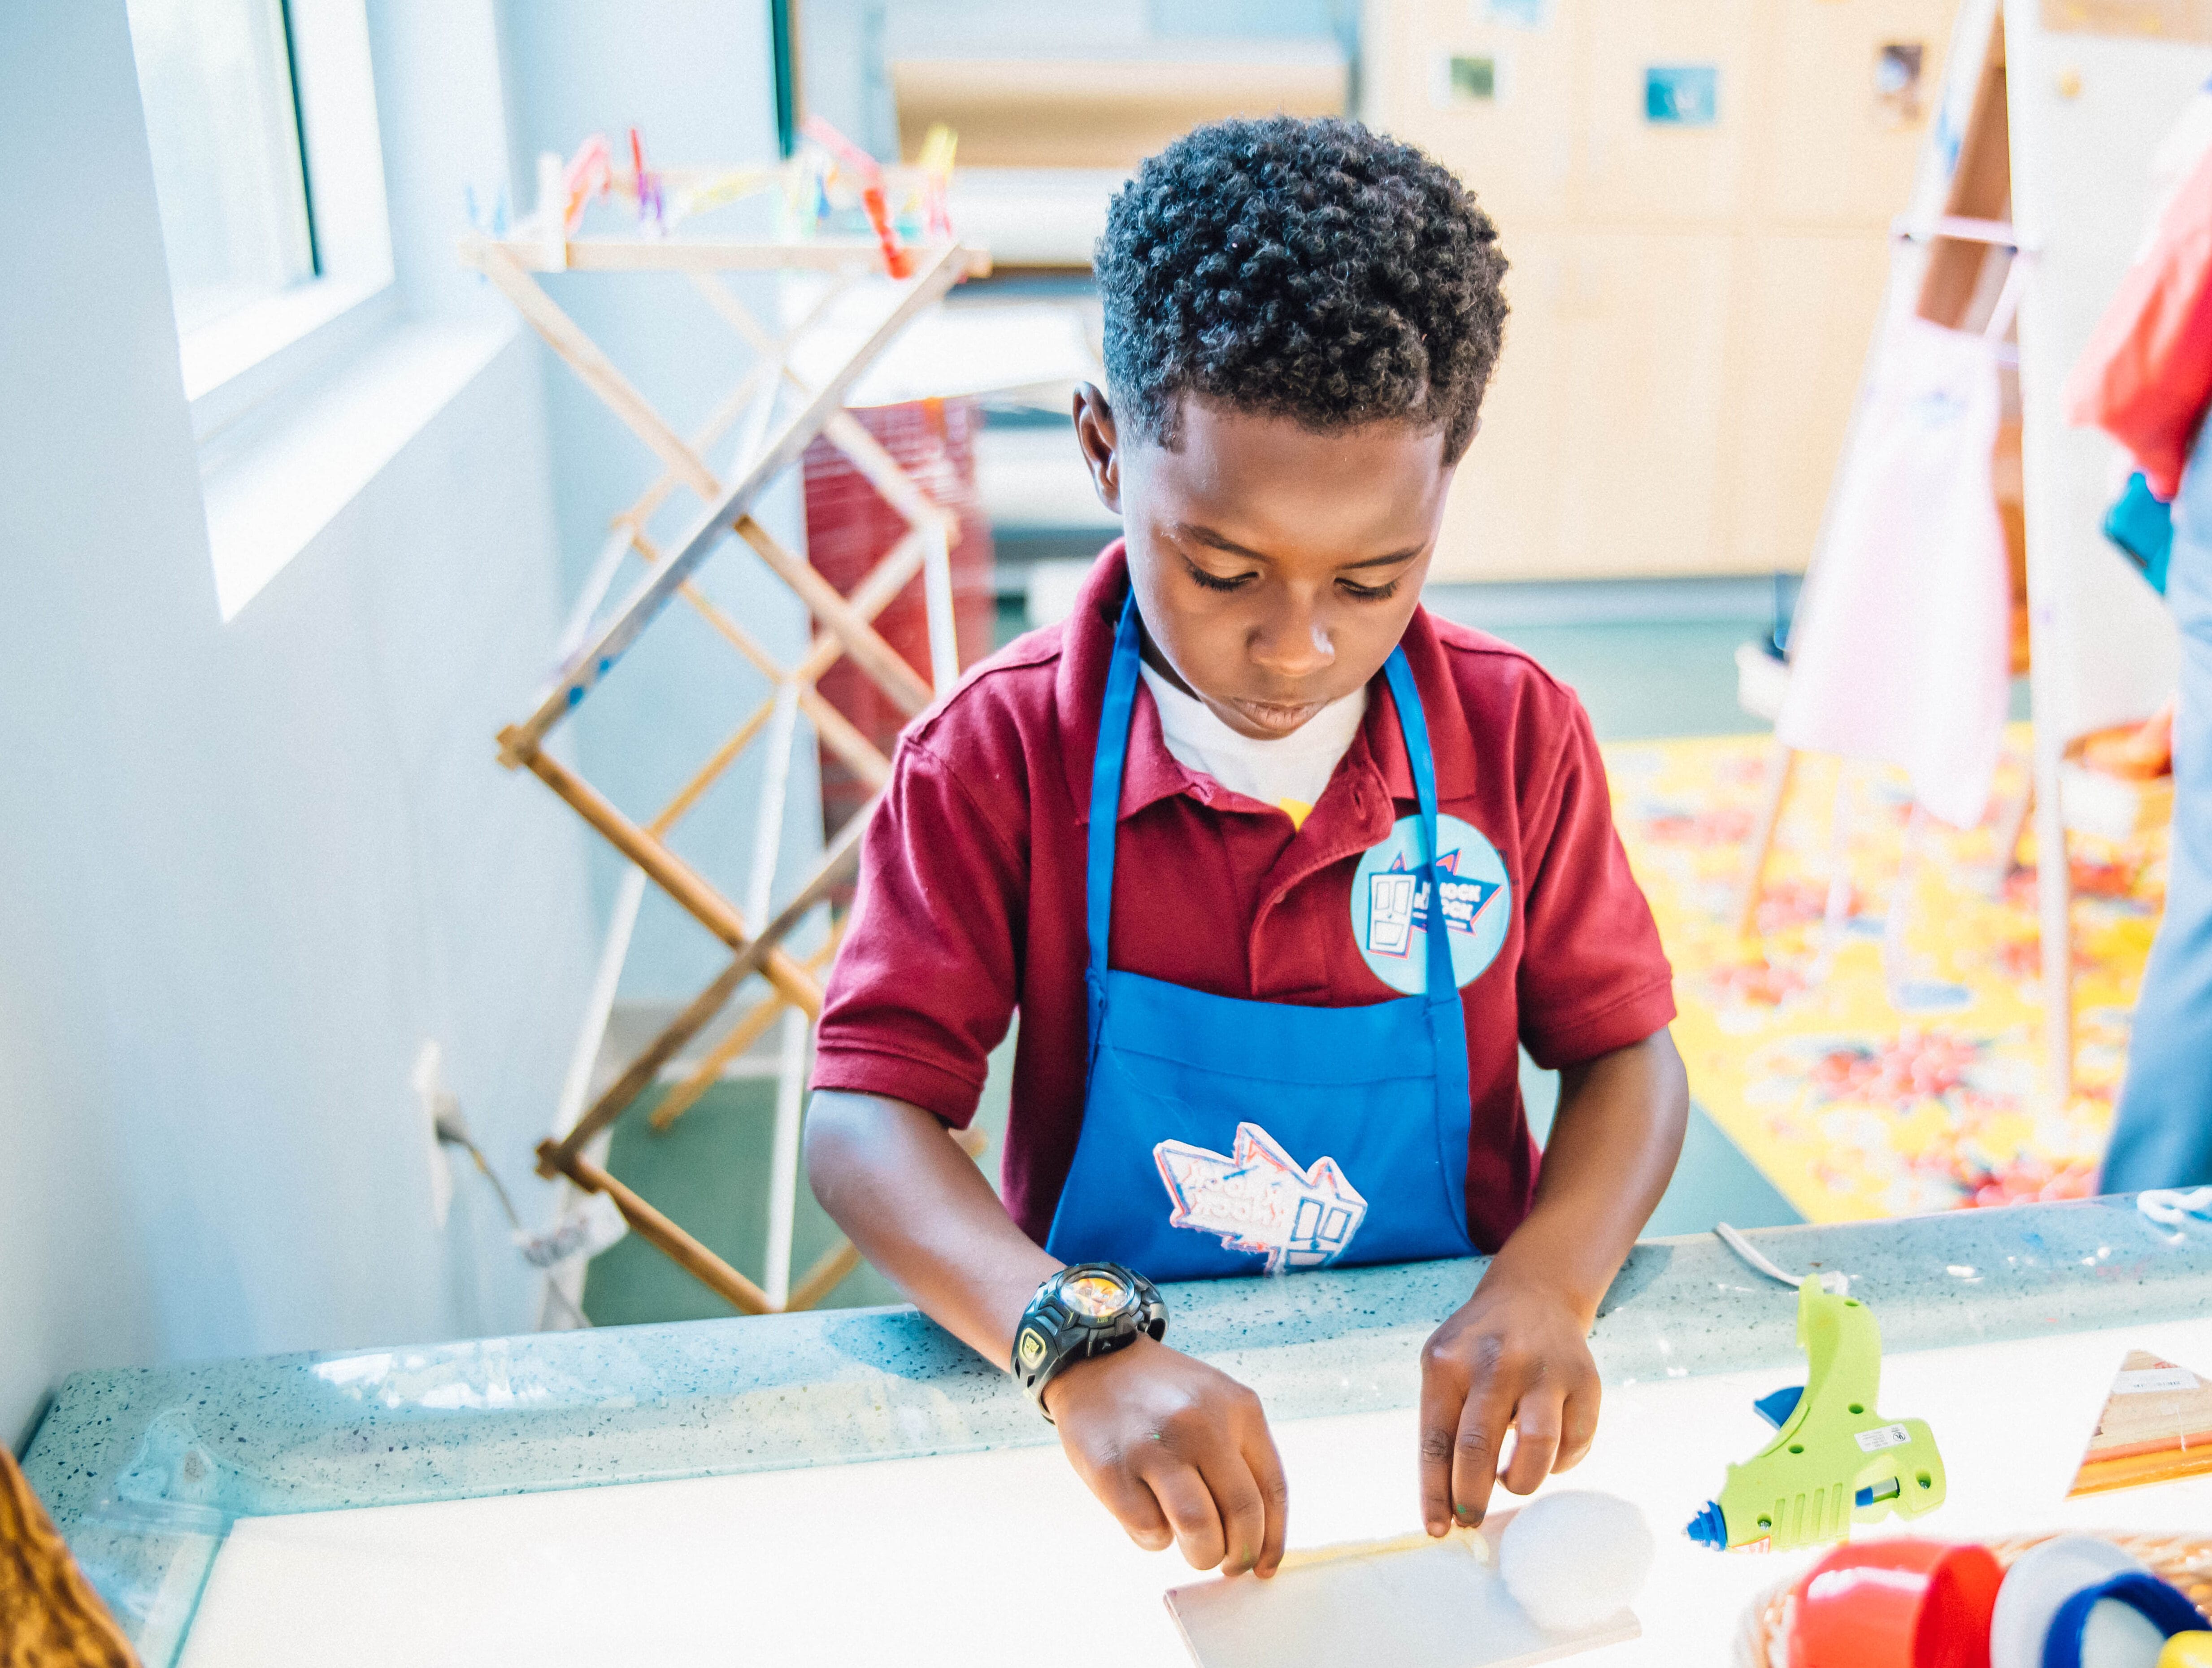 A young boy in a blue apron playing with art materials